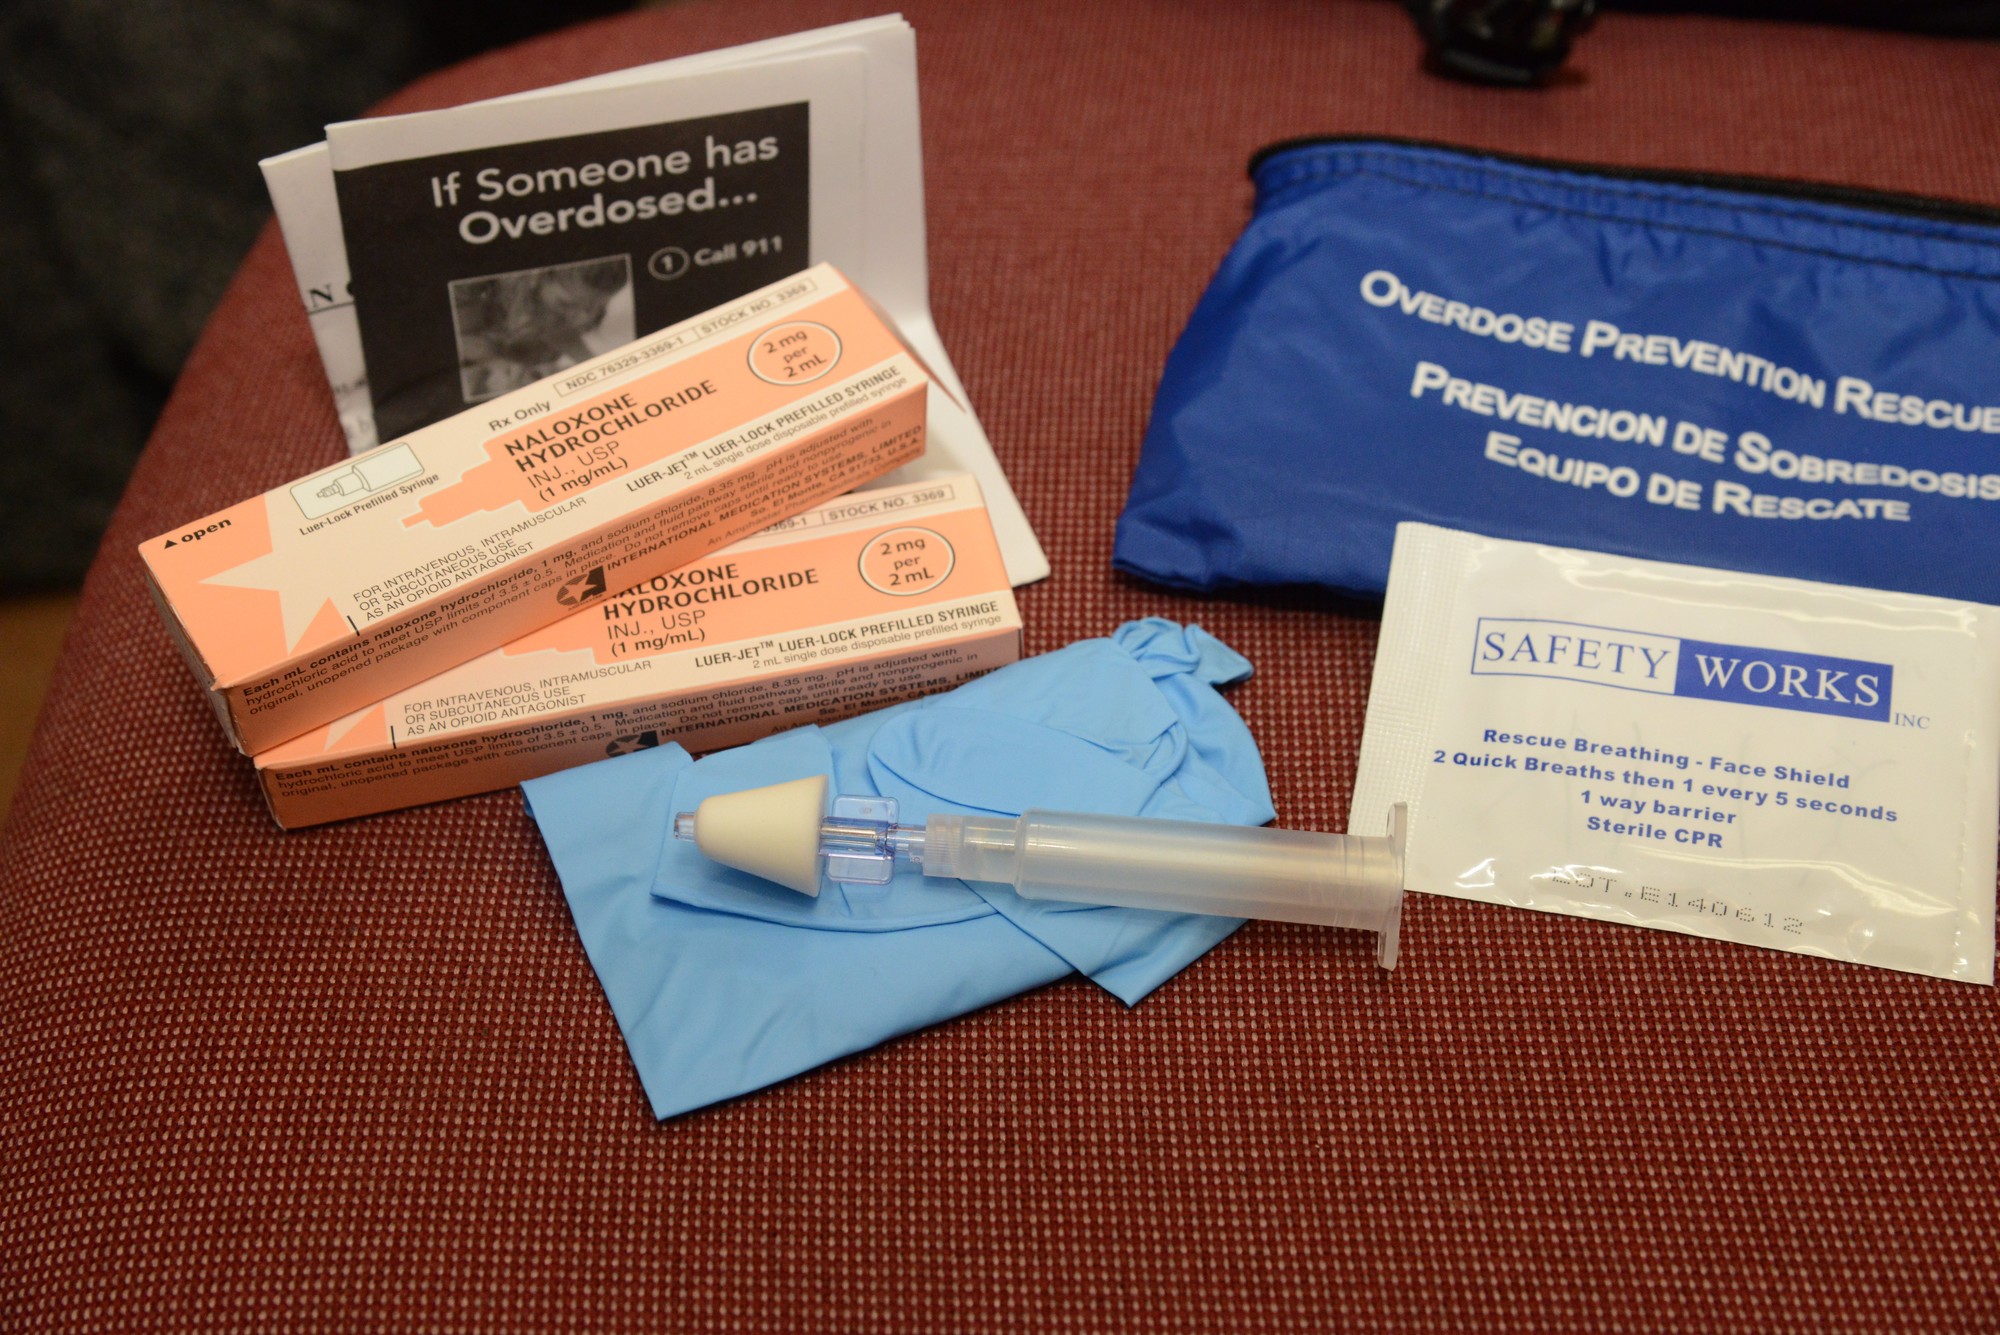 The overdose prevention kit will be provided at no charge to trainees over the age of 18 at the East Rockaway seminar.